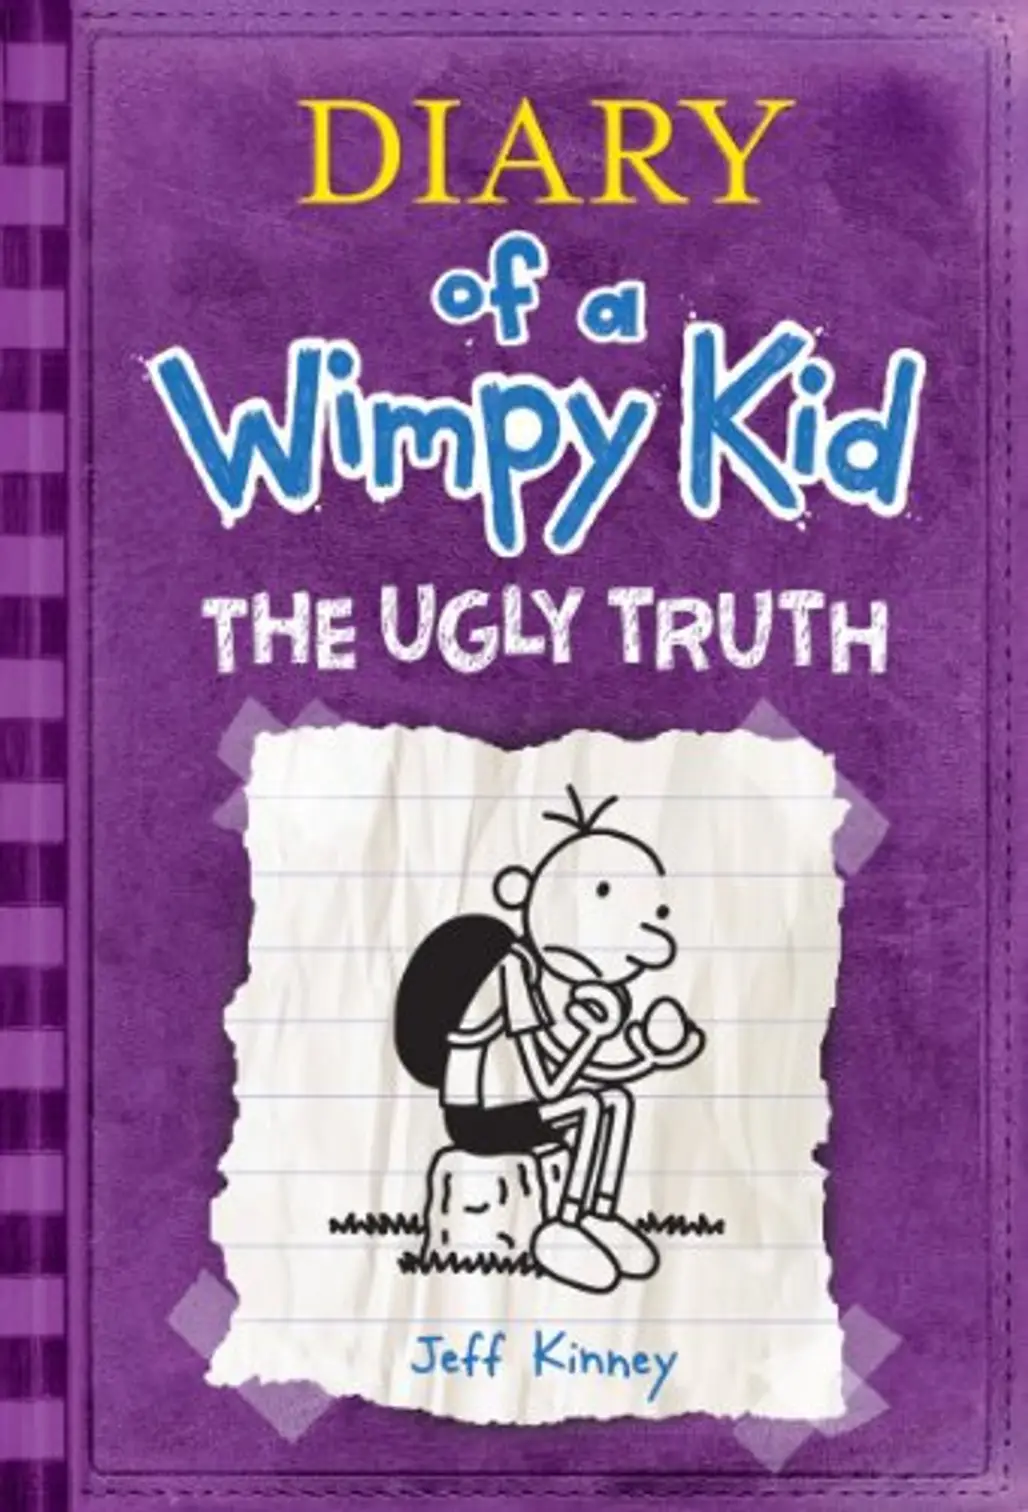 Diary of a Wimpy Kid: the Ugly Truth by Jeff Kinney